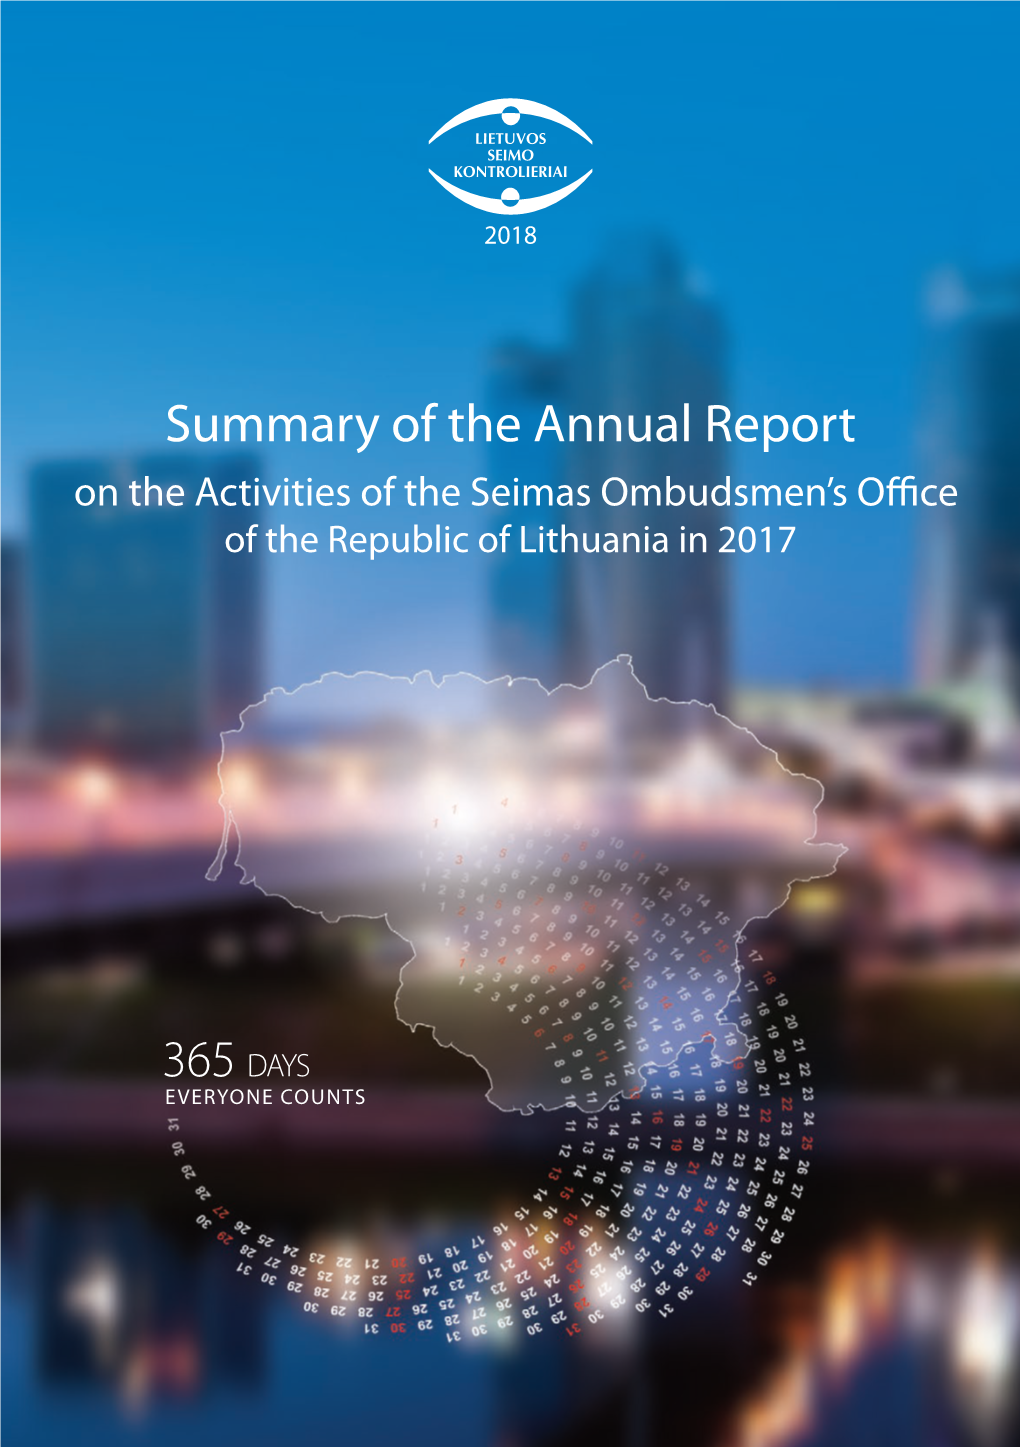 Summary of the Annual Report on the Activities of the Seimas Ombudsmen’S Office of the Republic of Lithuania in 2017